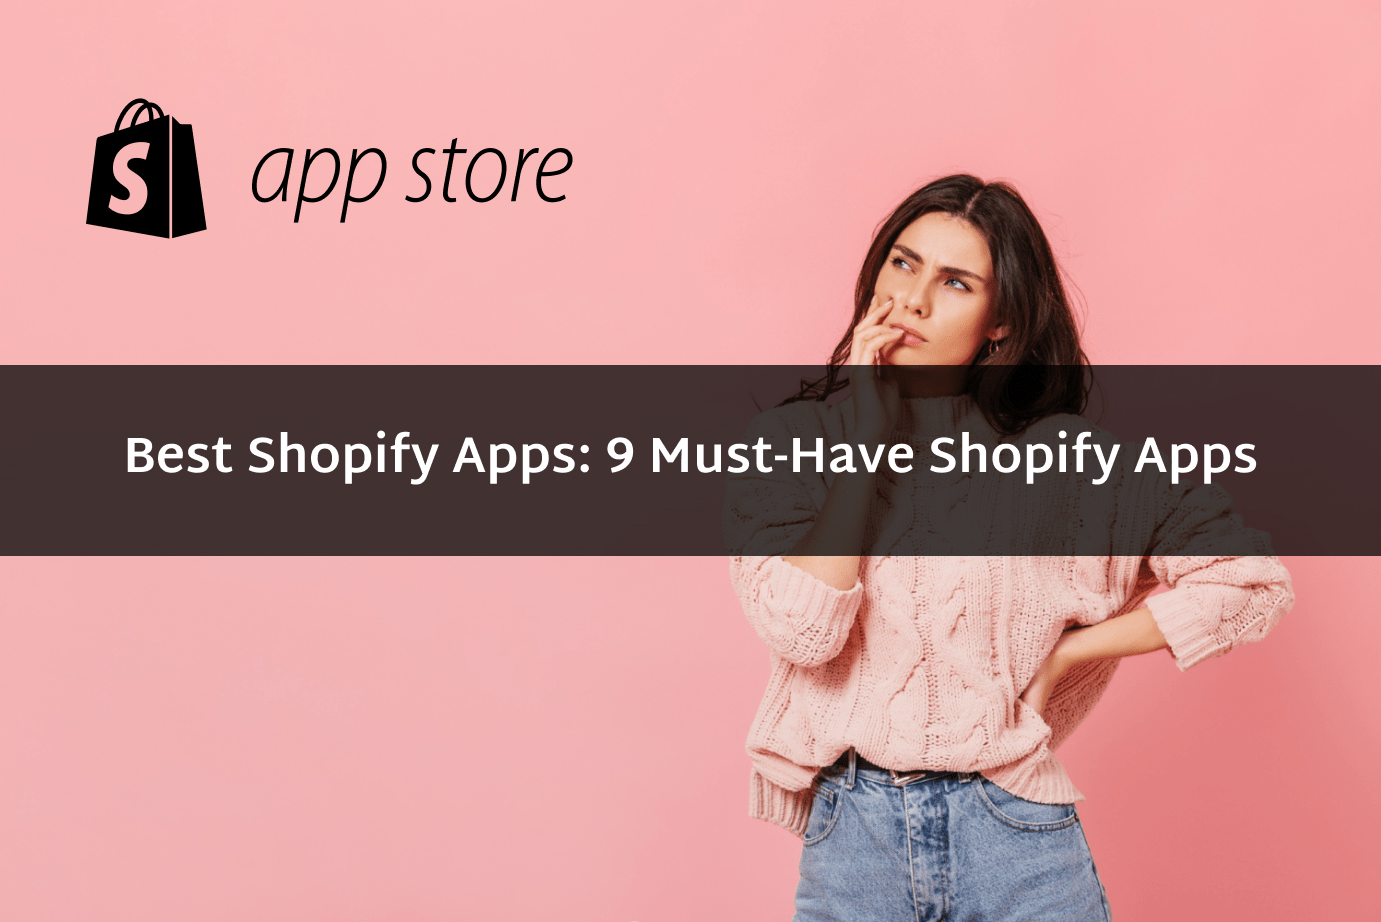 Best Shopify Apps: 9 Must-Have Shopify Apps